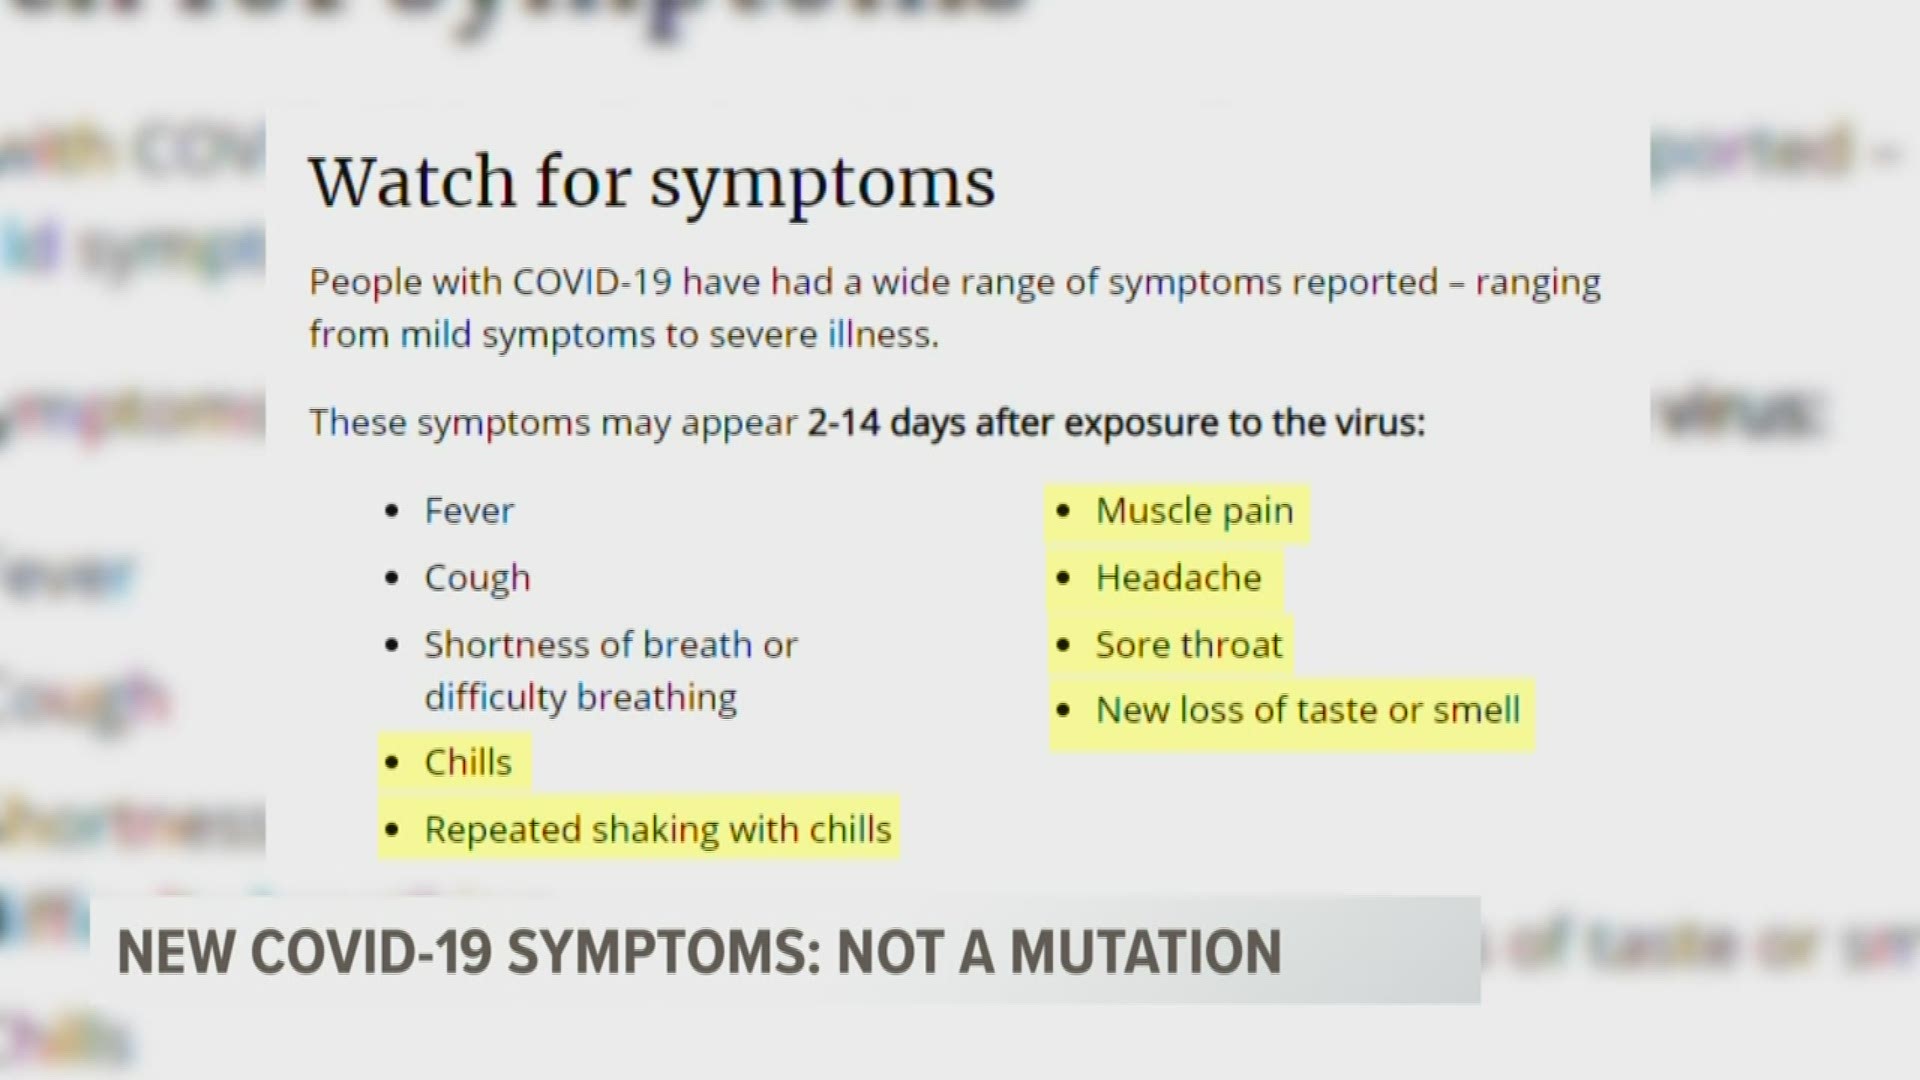 The CDC added six new official symptoms to their list showing signs of COVID-19.